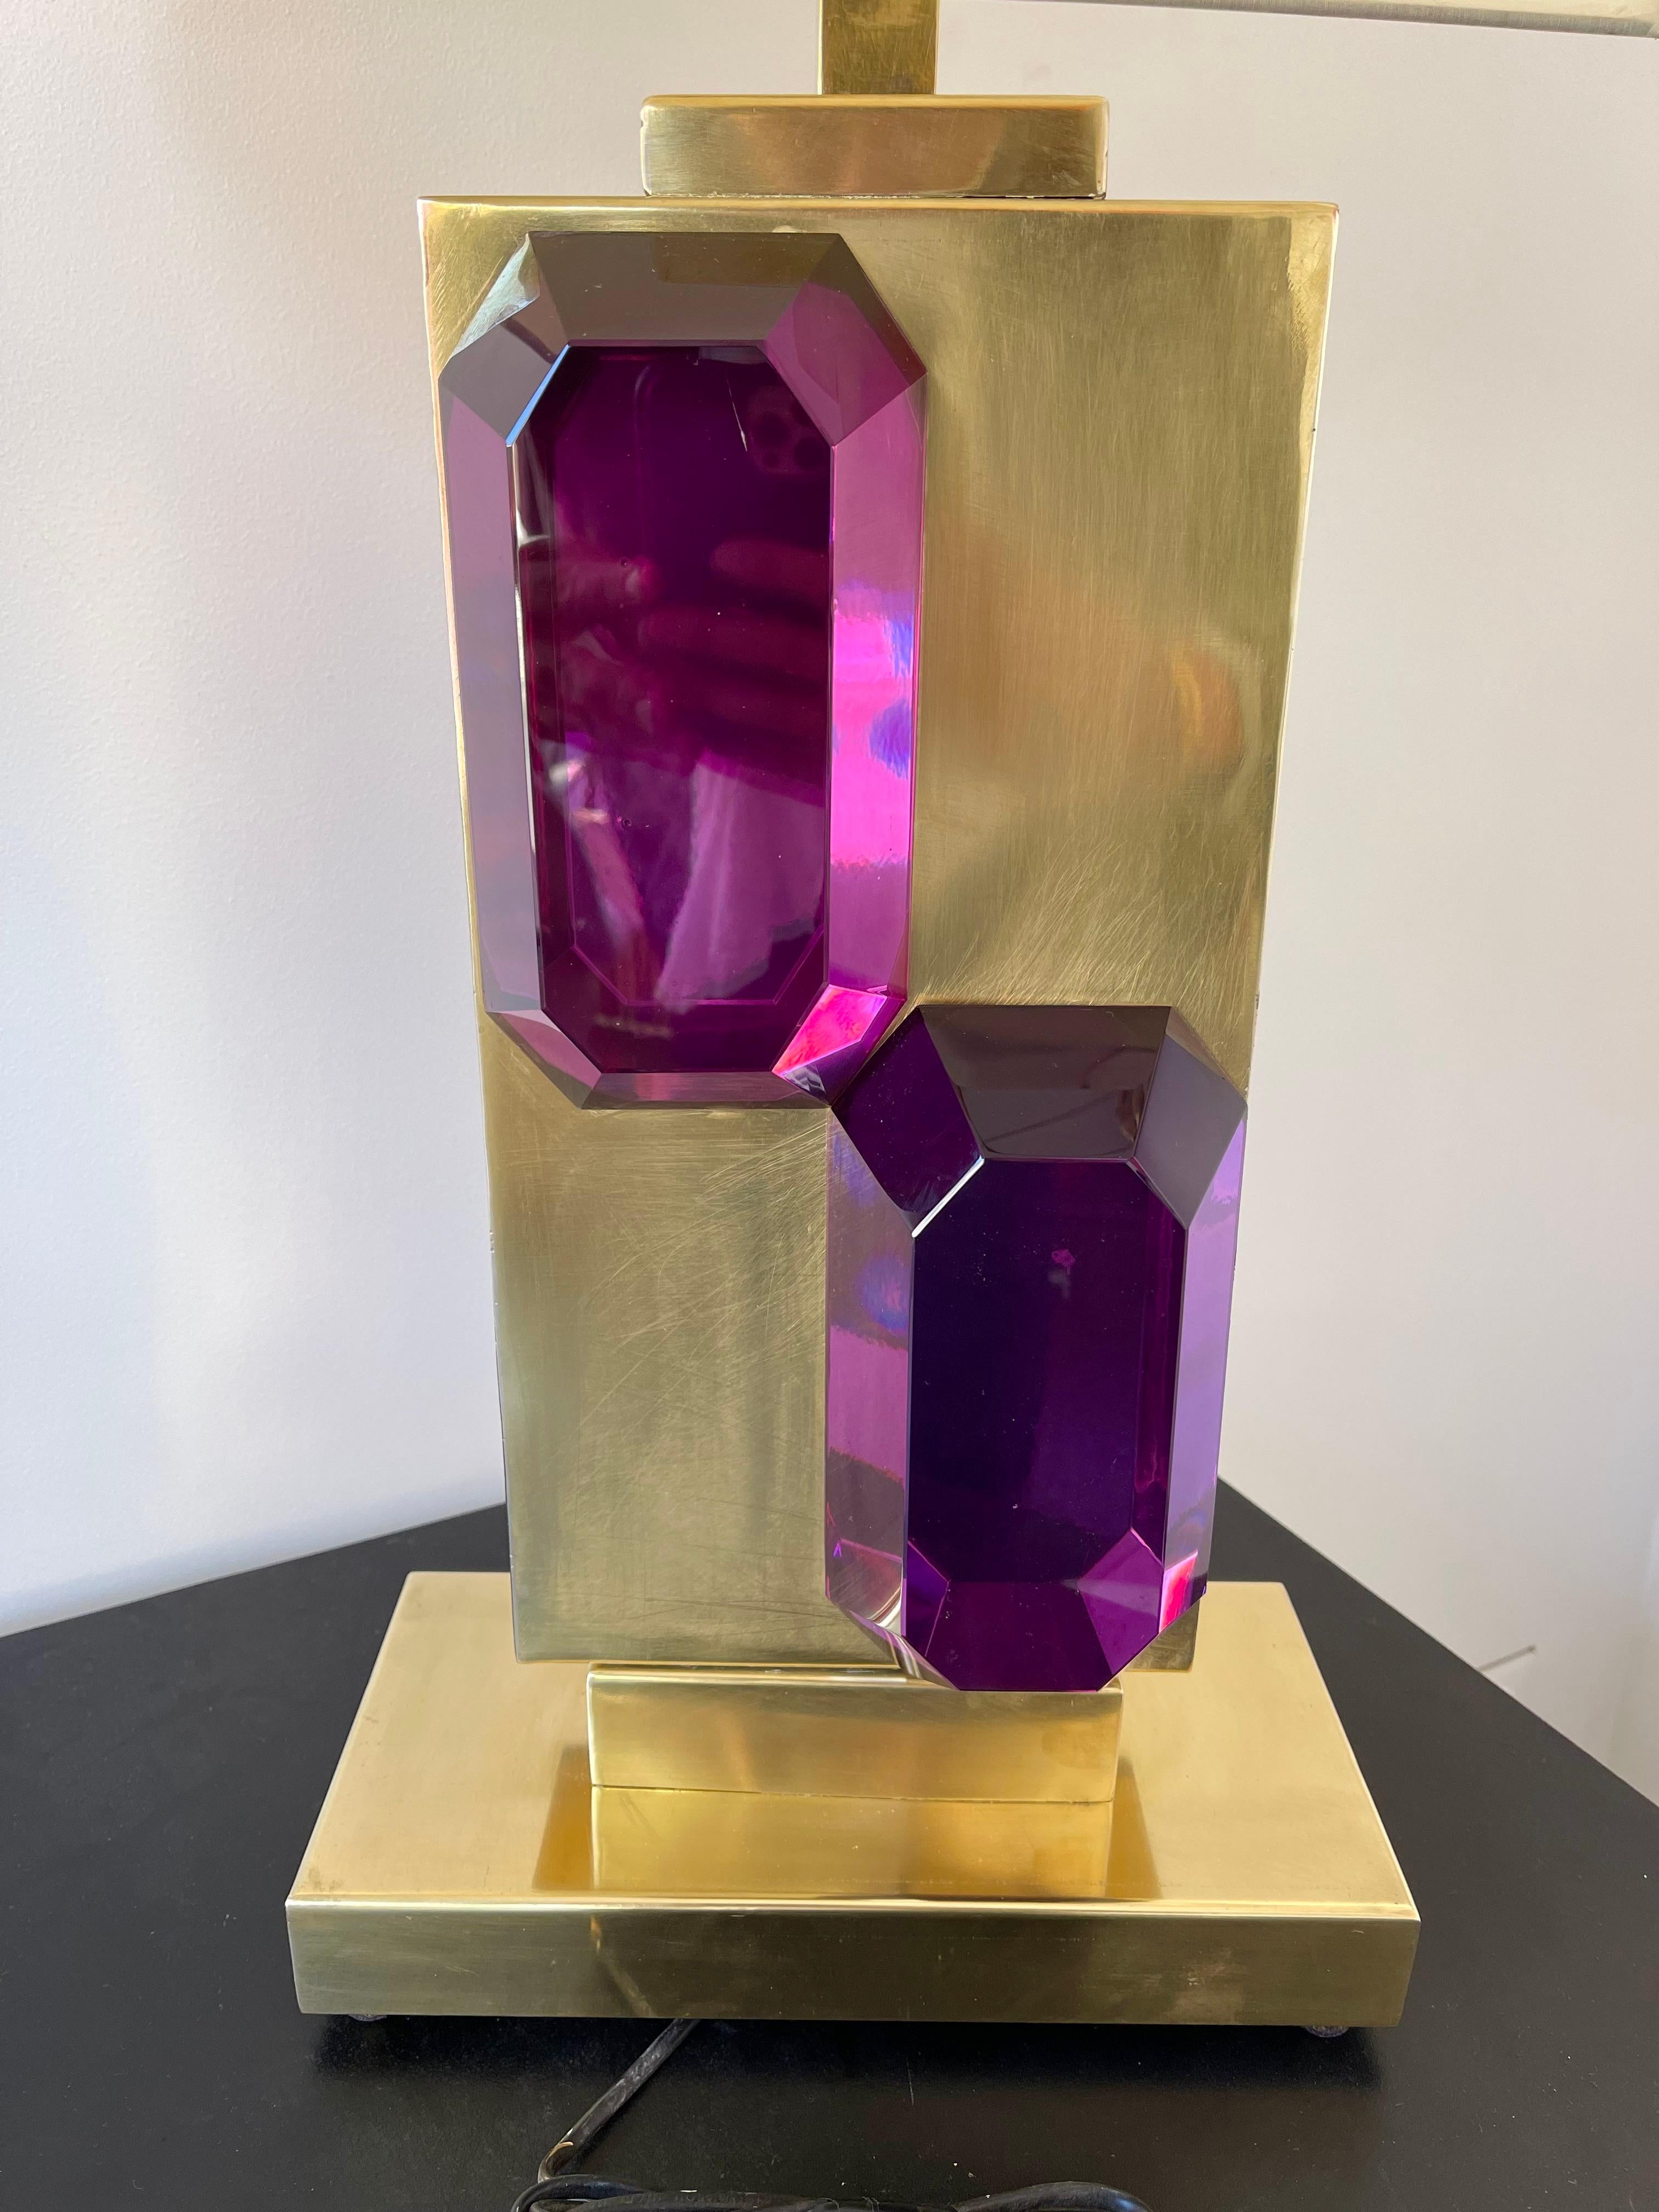 Pair of purple amethyst Murano glass bar and brass table or bedside lamps. Contemporary work from a small artisanal italian design workshop. In the mood of Mid-Century Modern, Hollywood Regency, Venini, Mazzega, La Murrina, Veronese, Barovier,